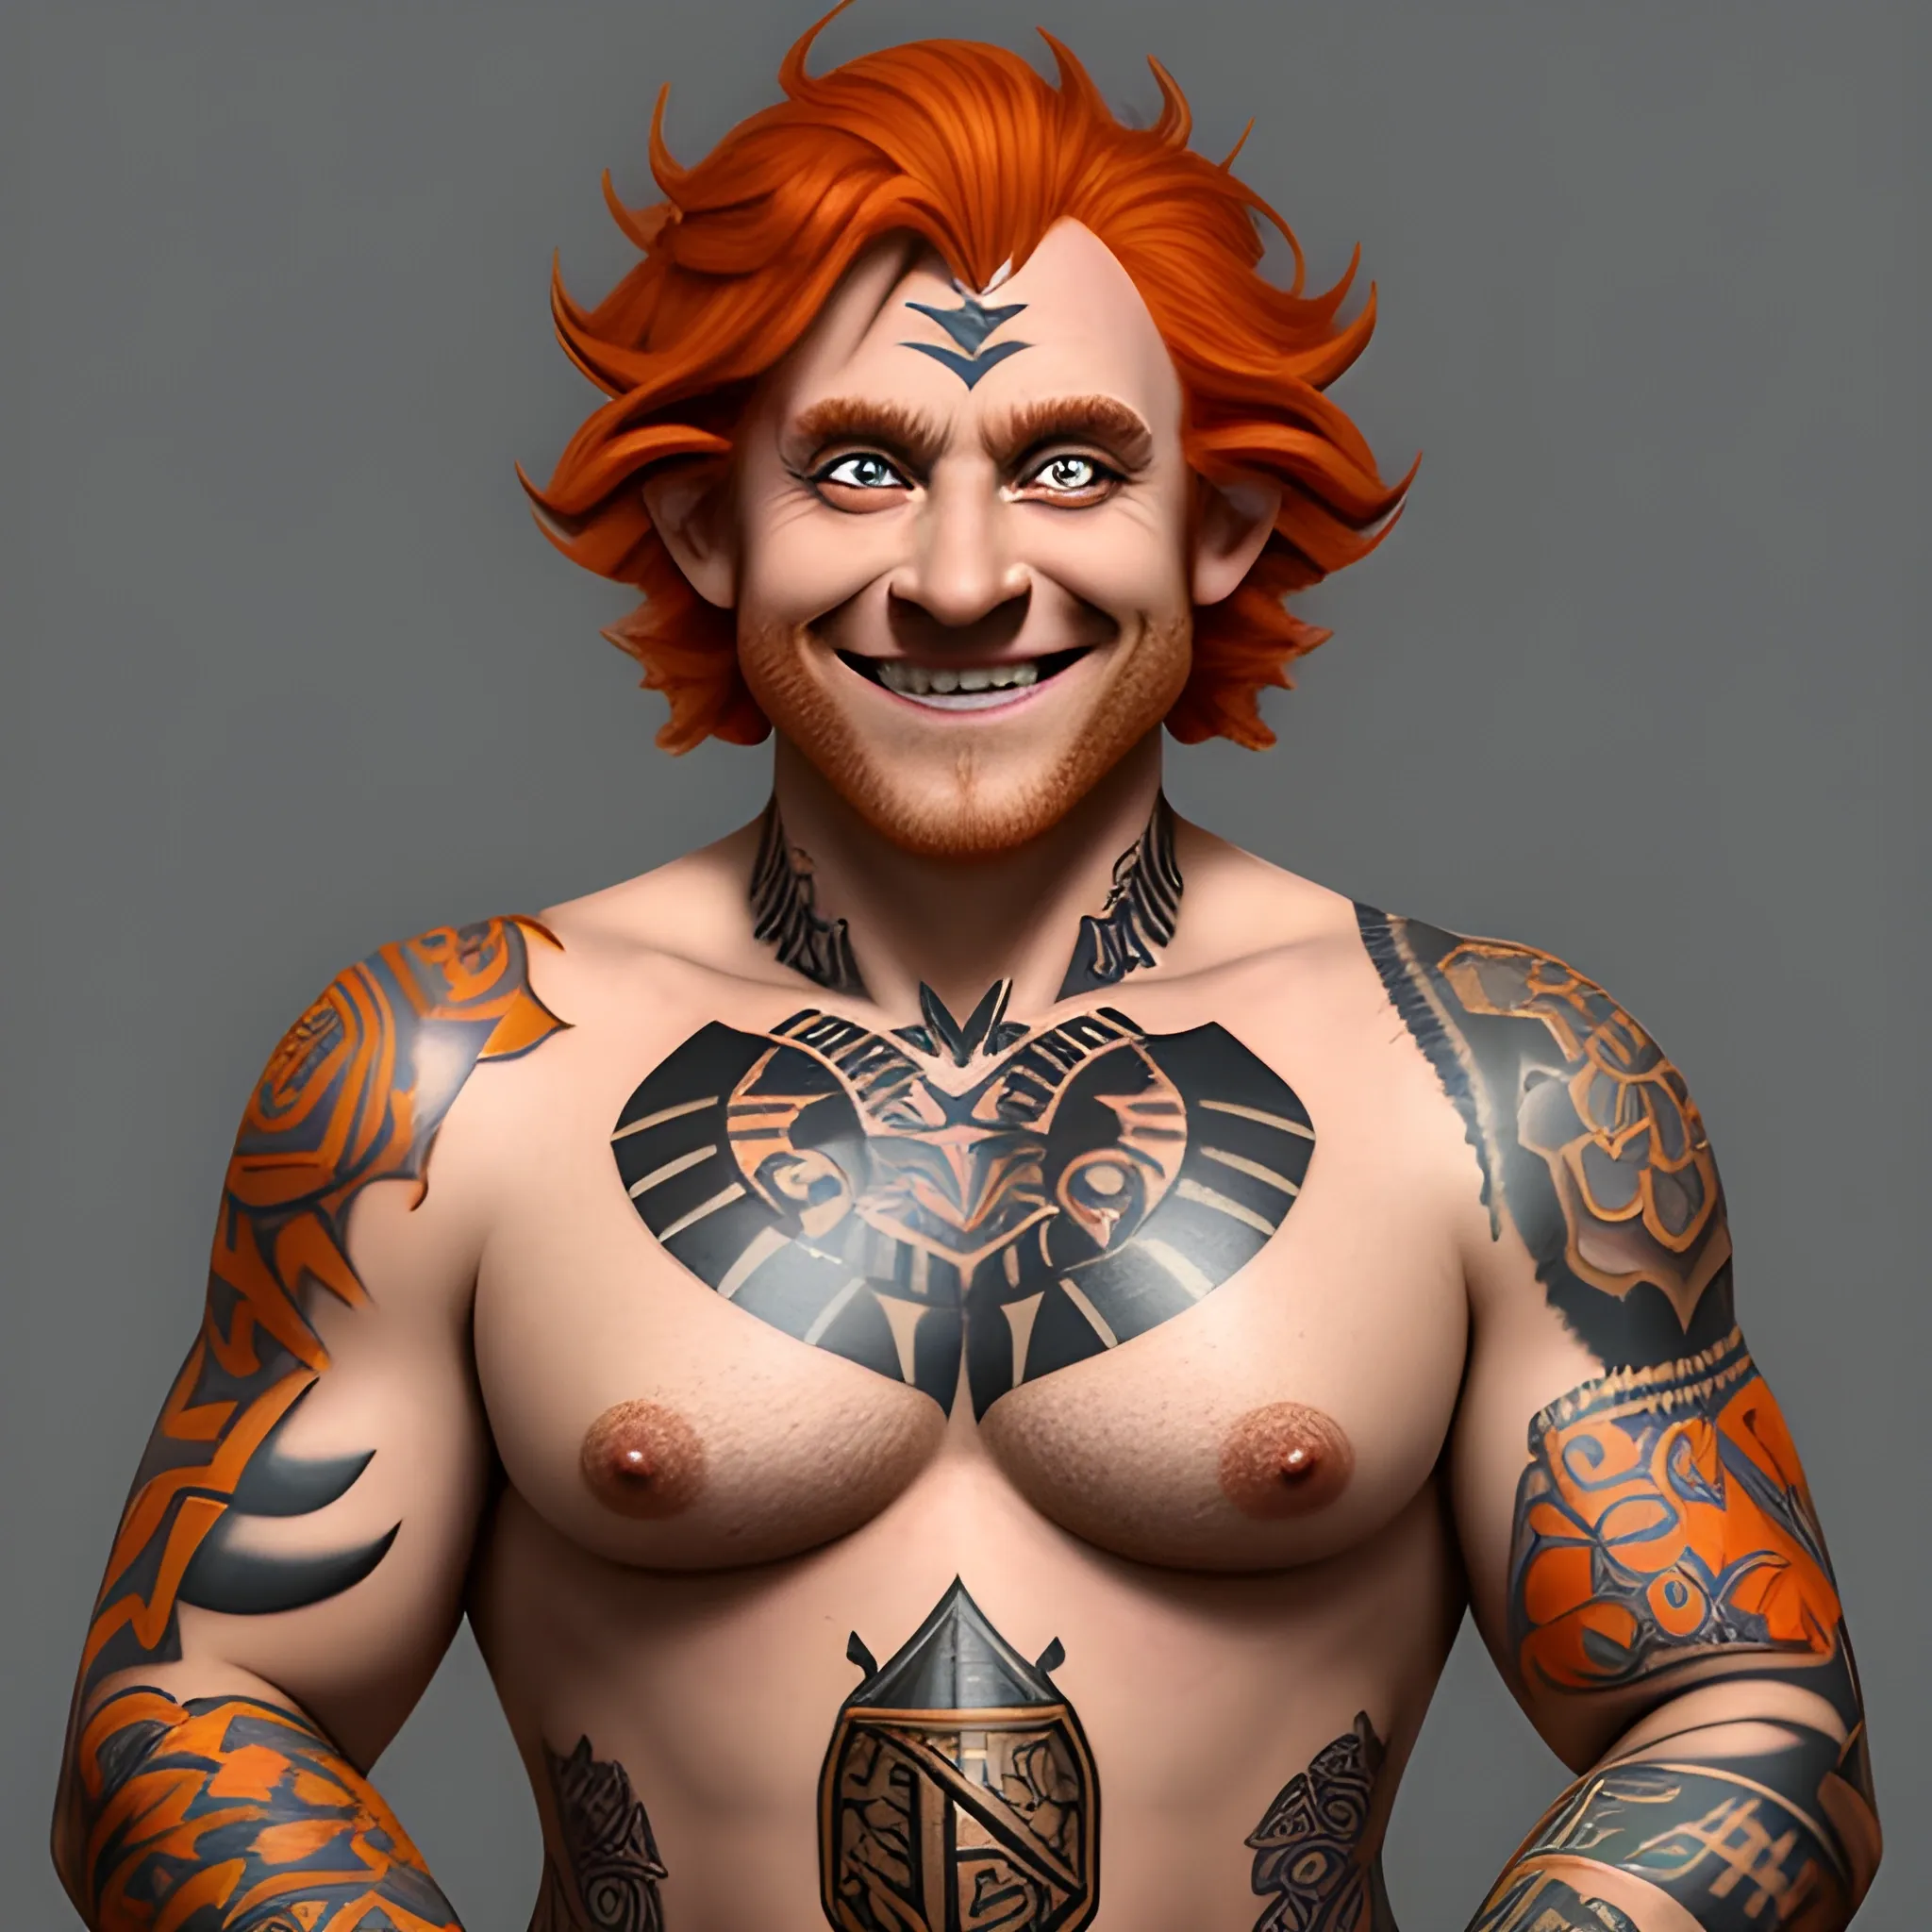 DnD  weak slim shaped  baby face halfling male short haired halfling dark orange ginger with a shoulder tattoo smiling with a mugshot expression and playing a small drum 